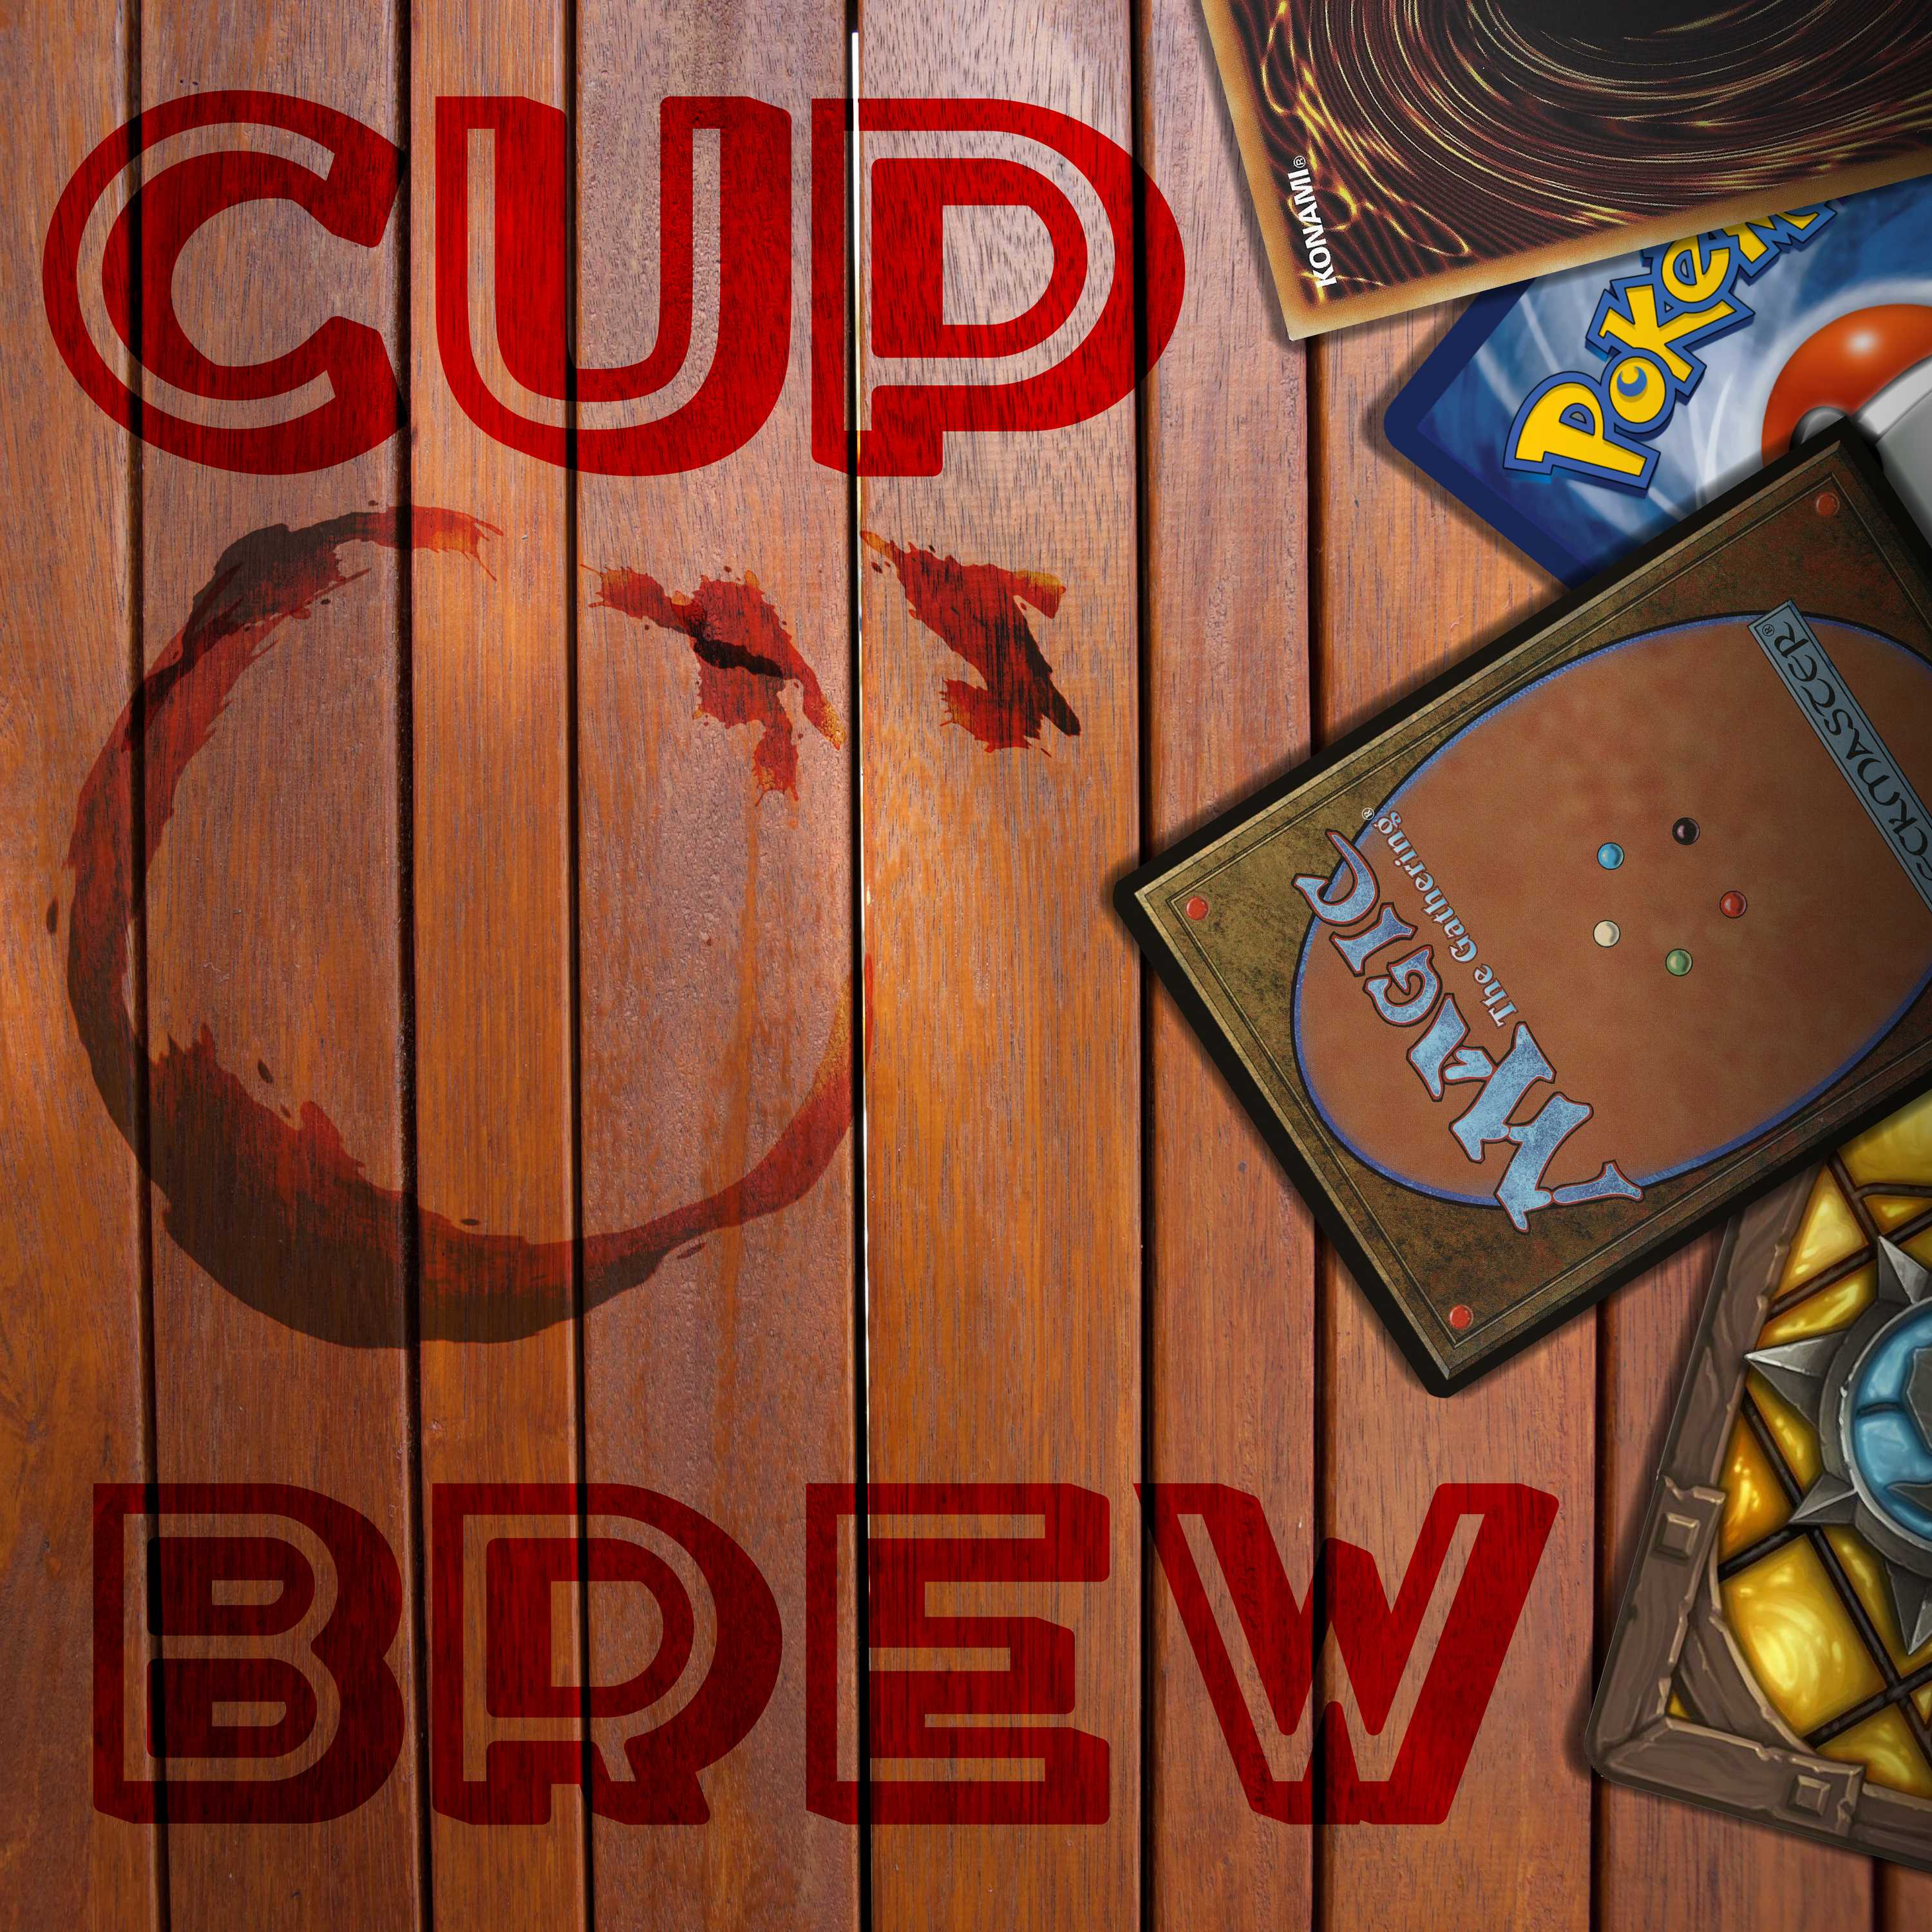 Cup O' Brew